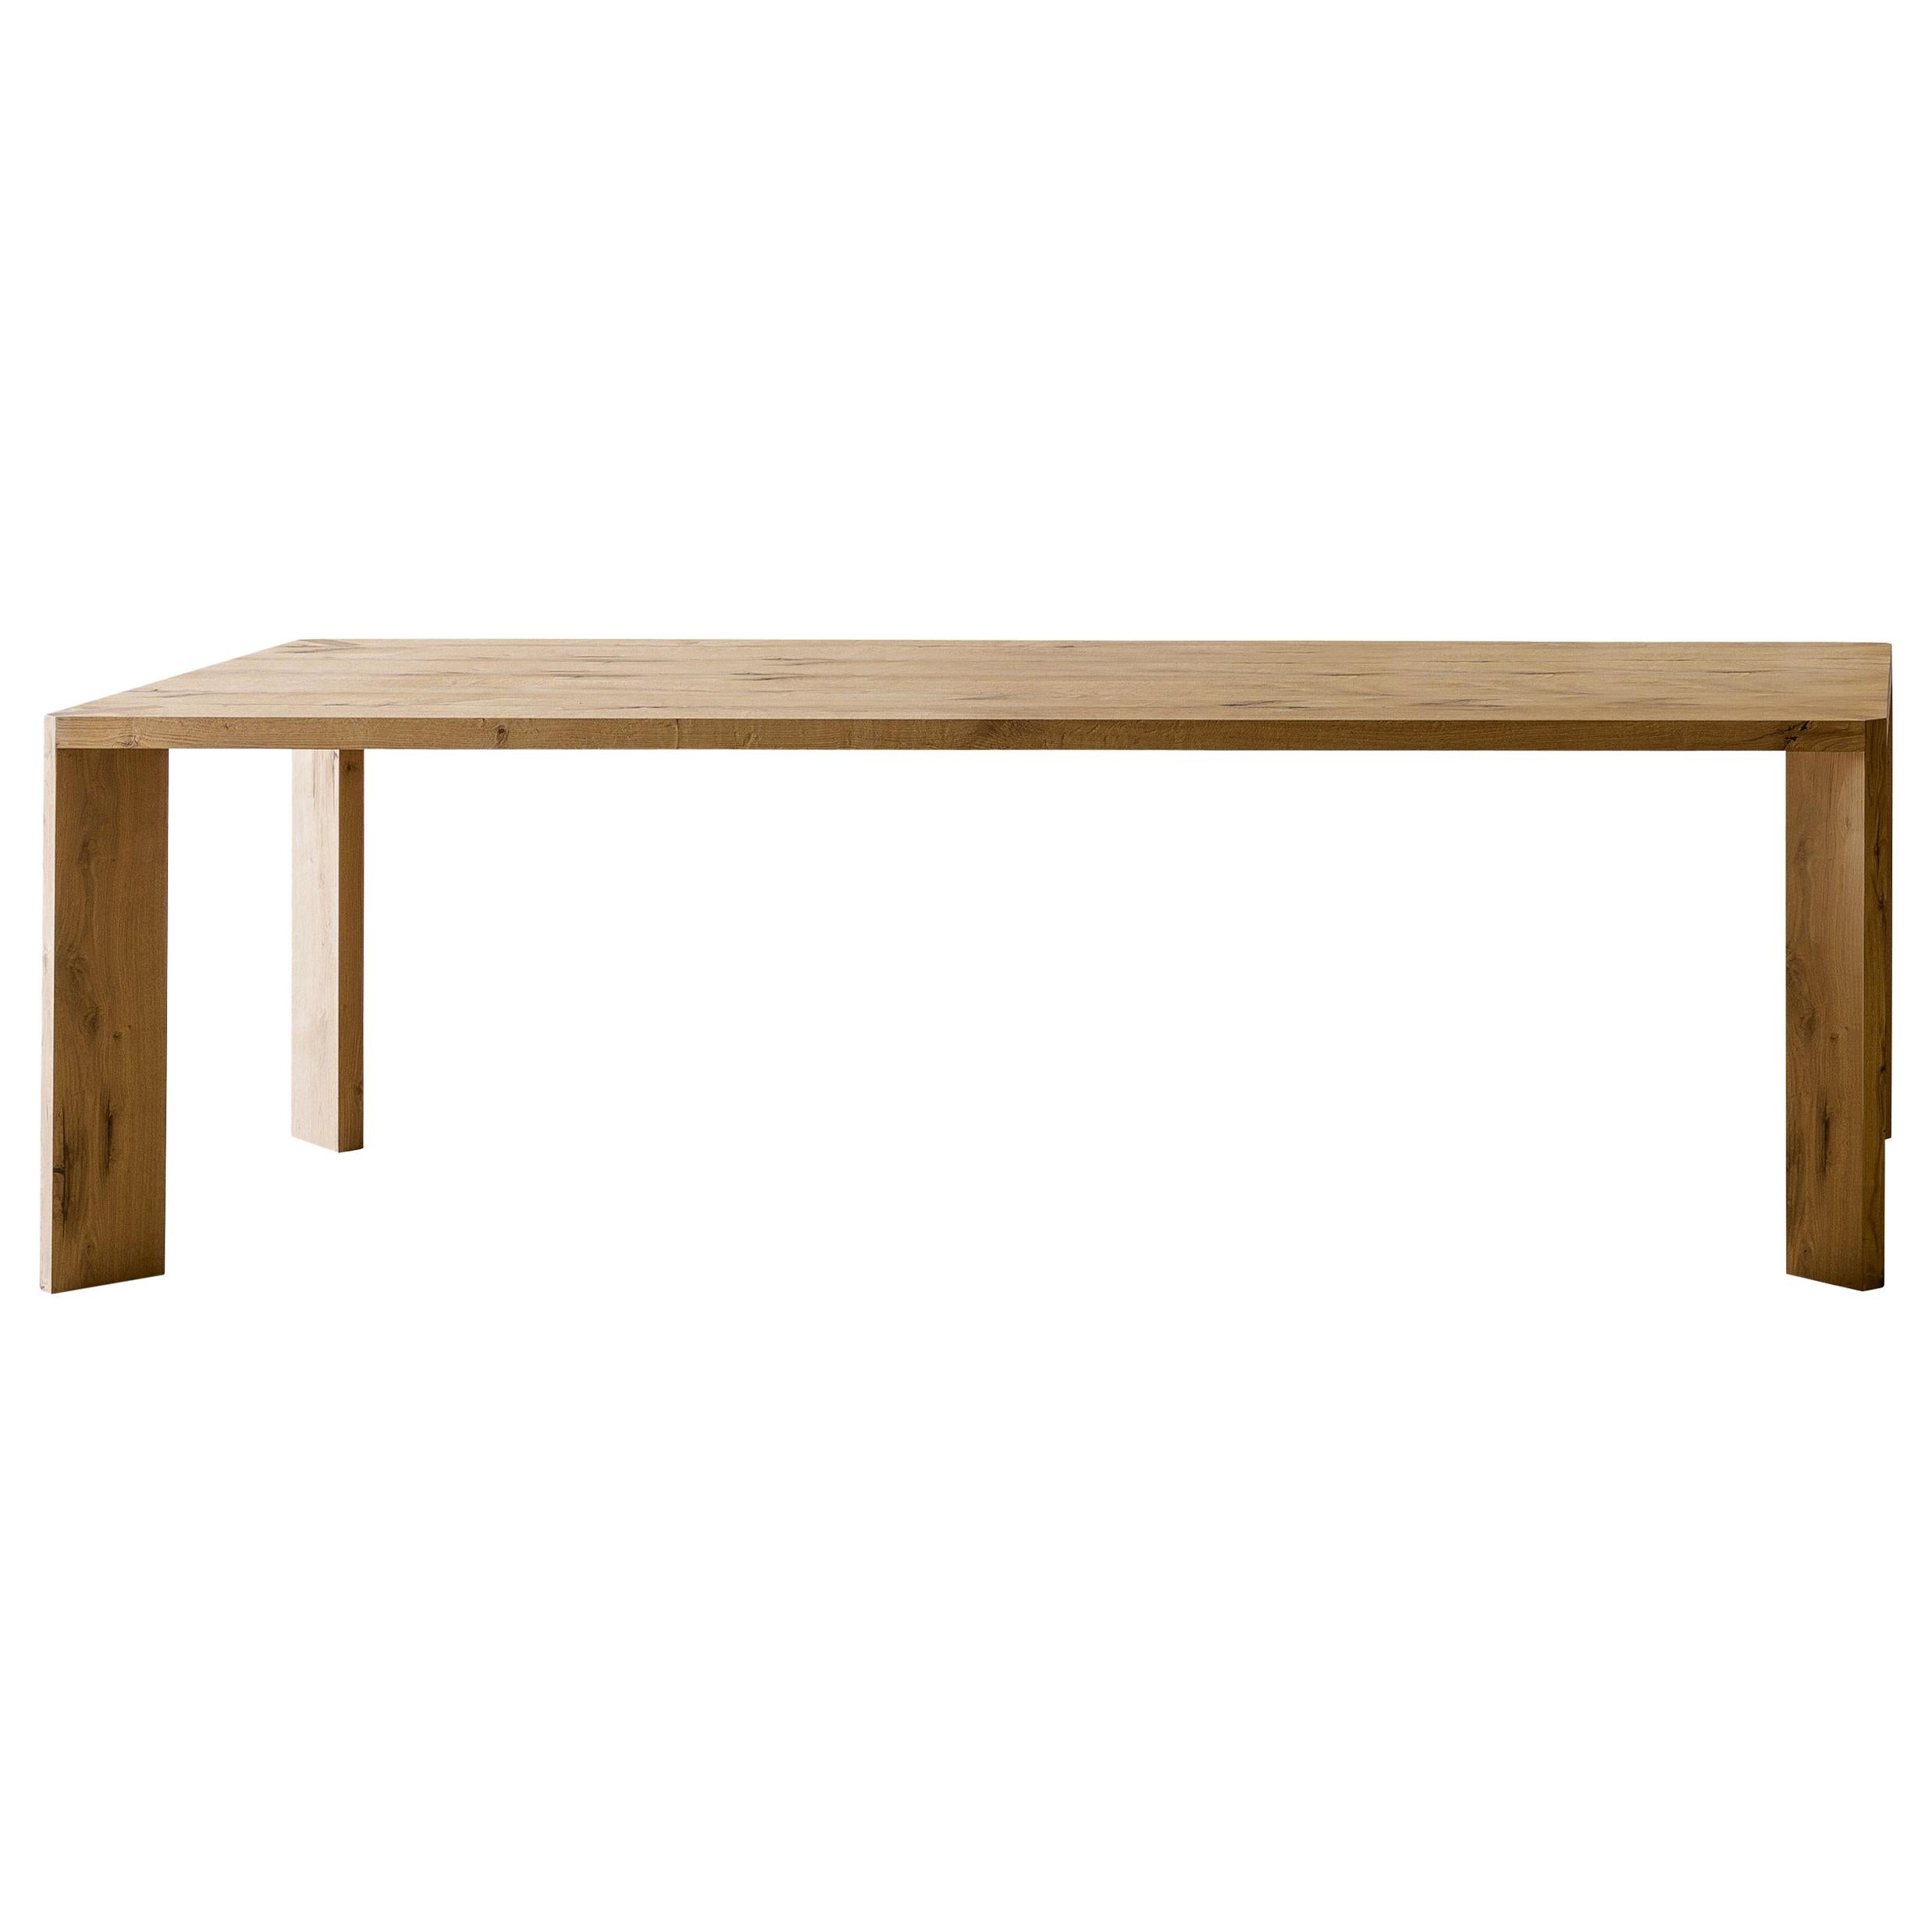 Manero Small Table in Vintage Oak by Paolo Cappello For Sale at 1stDibs